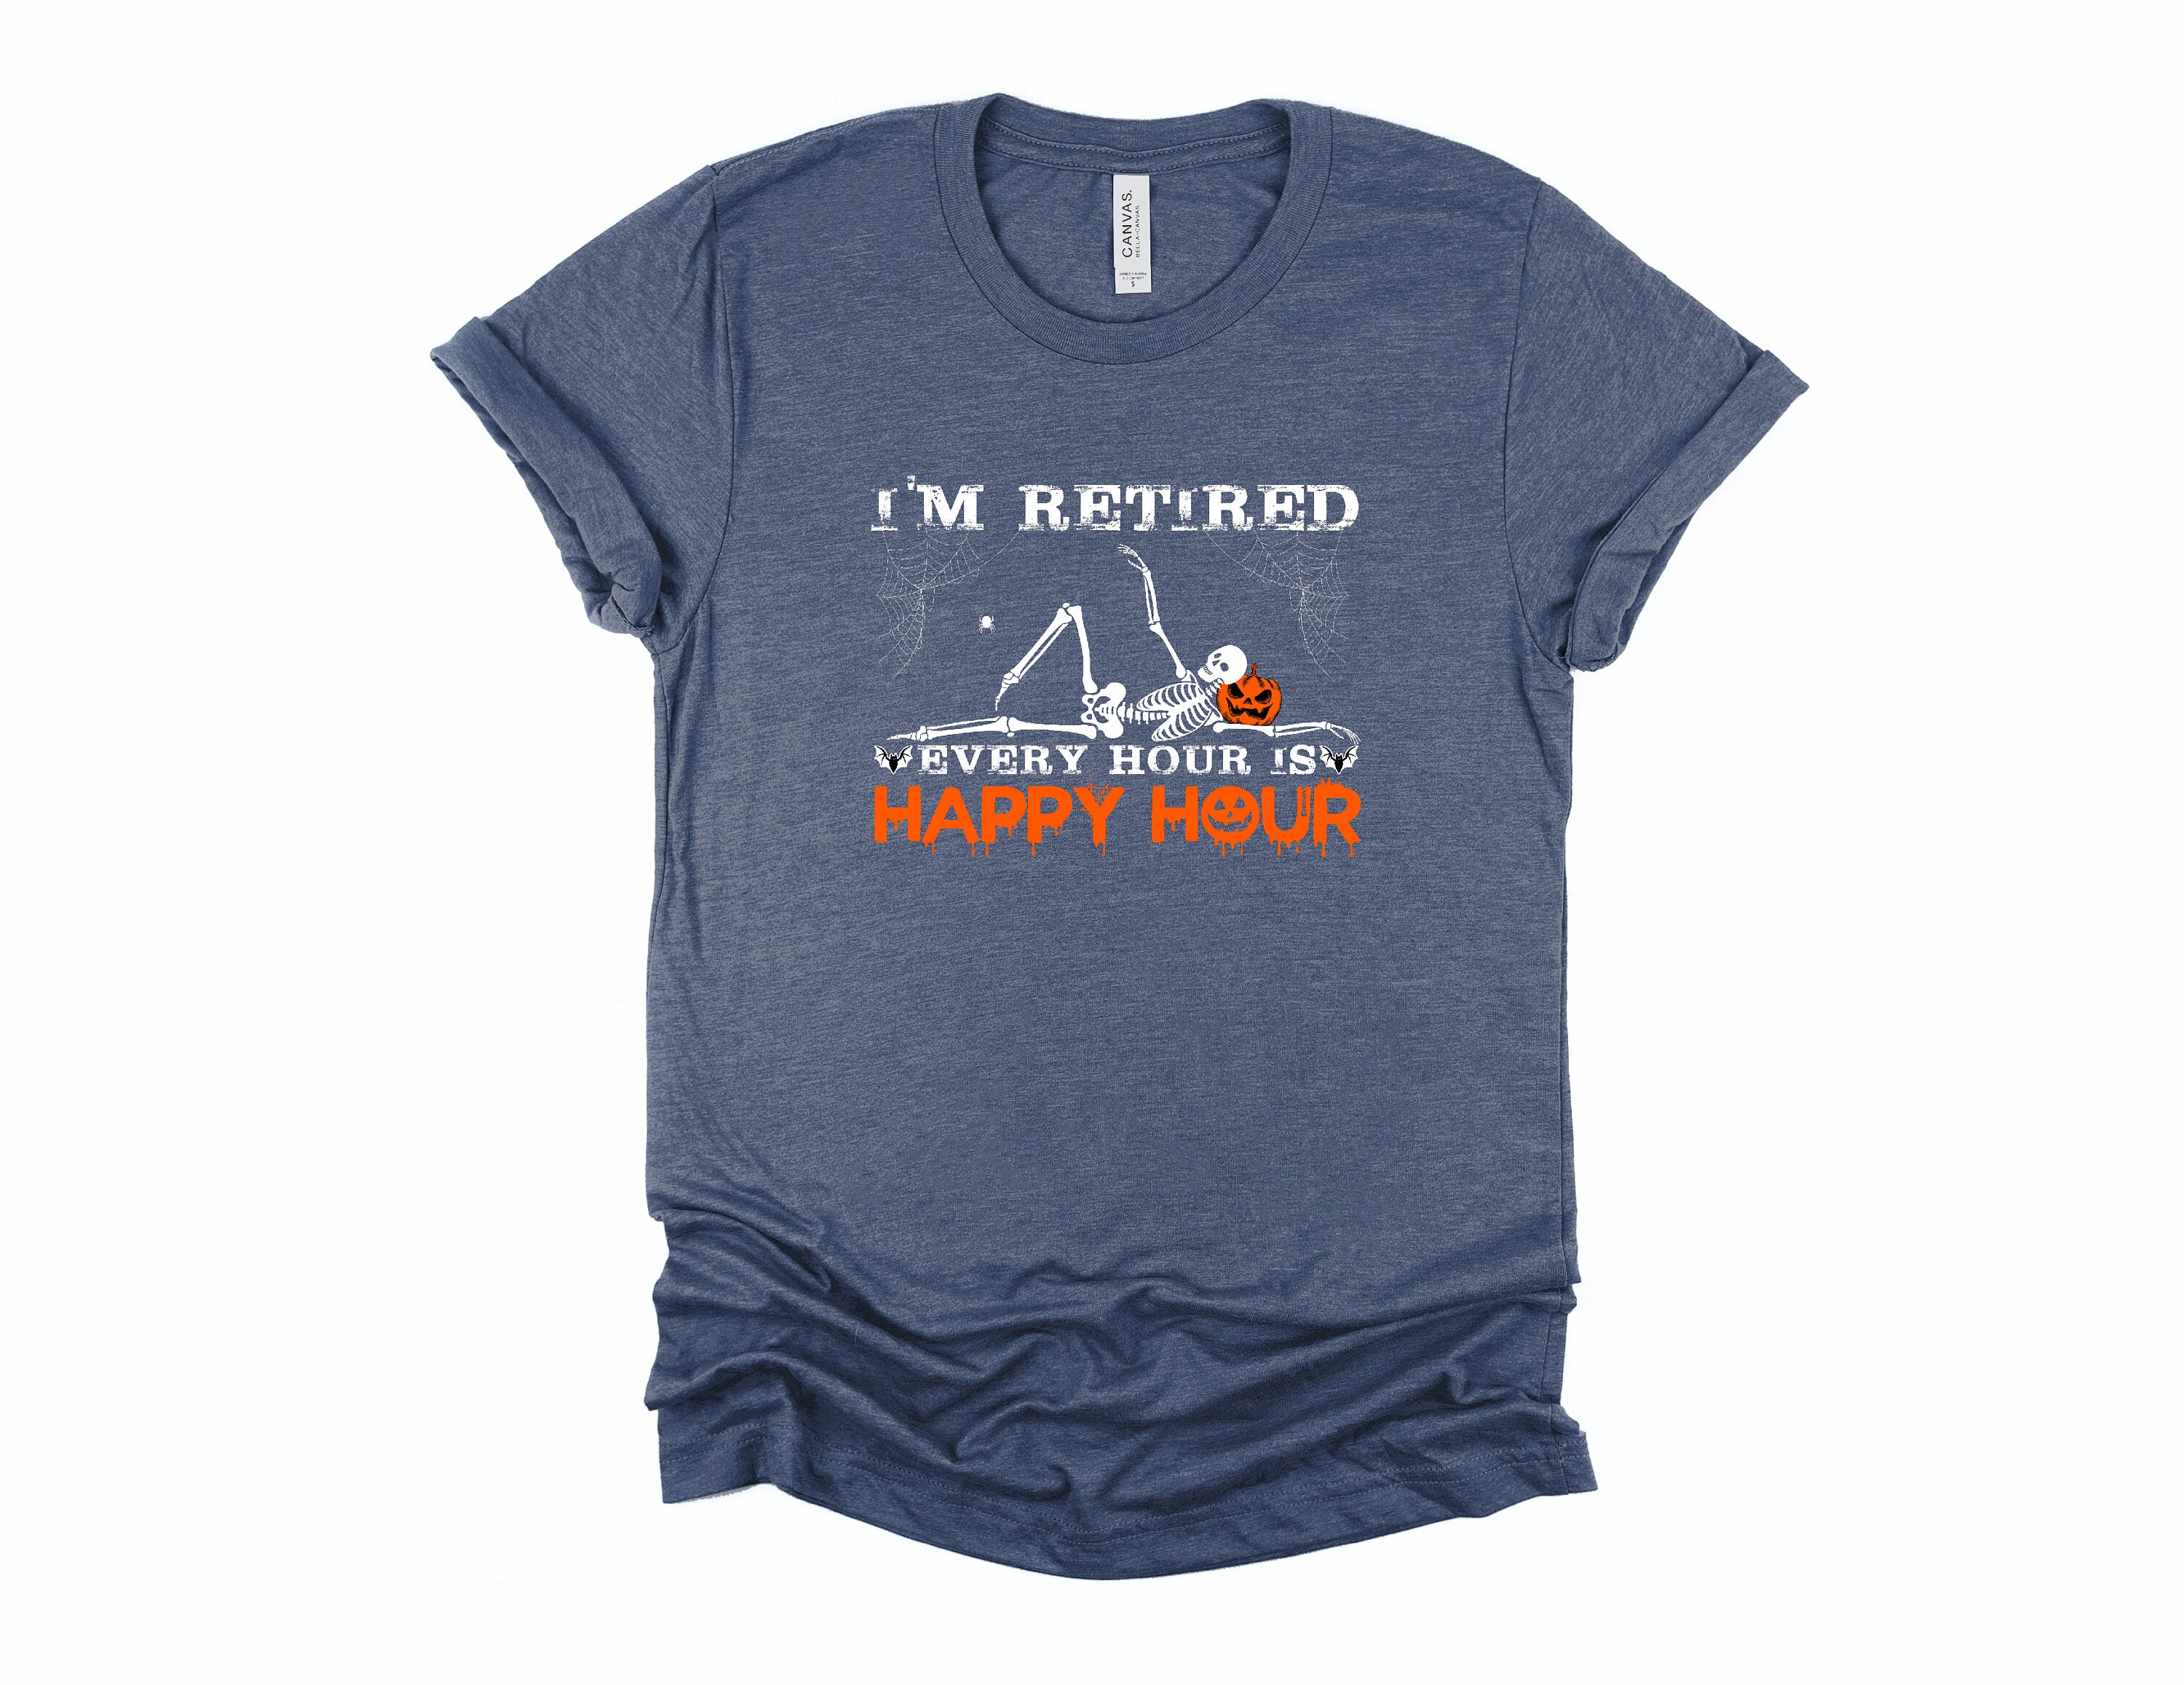 Discover I'm Retired Every Hour Is Happy Hour Funny Skeleton Shirt, Halloween Grandpa Shirt, Retired Grandma Halloween Shirt, Retirement Party Tshirt